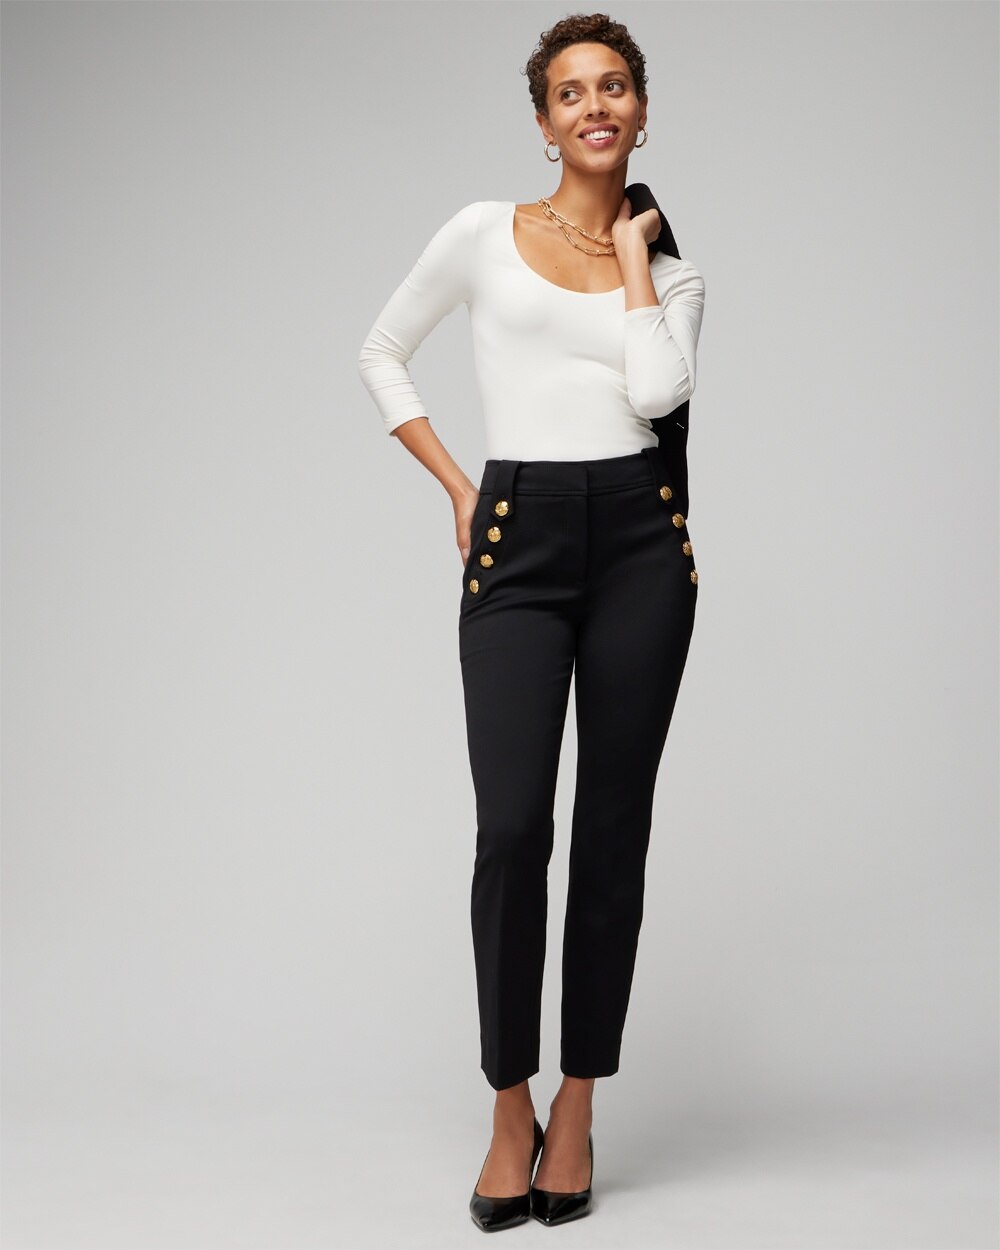 WHBM\u00AE Jolie Button Straight Lux Stretch Pant video preview image, click to start video